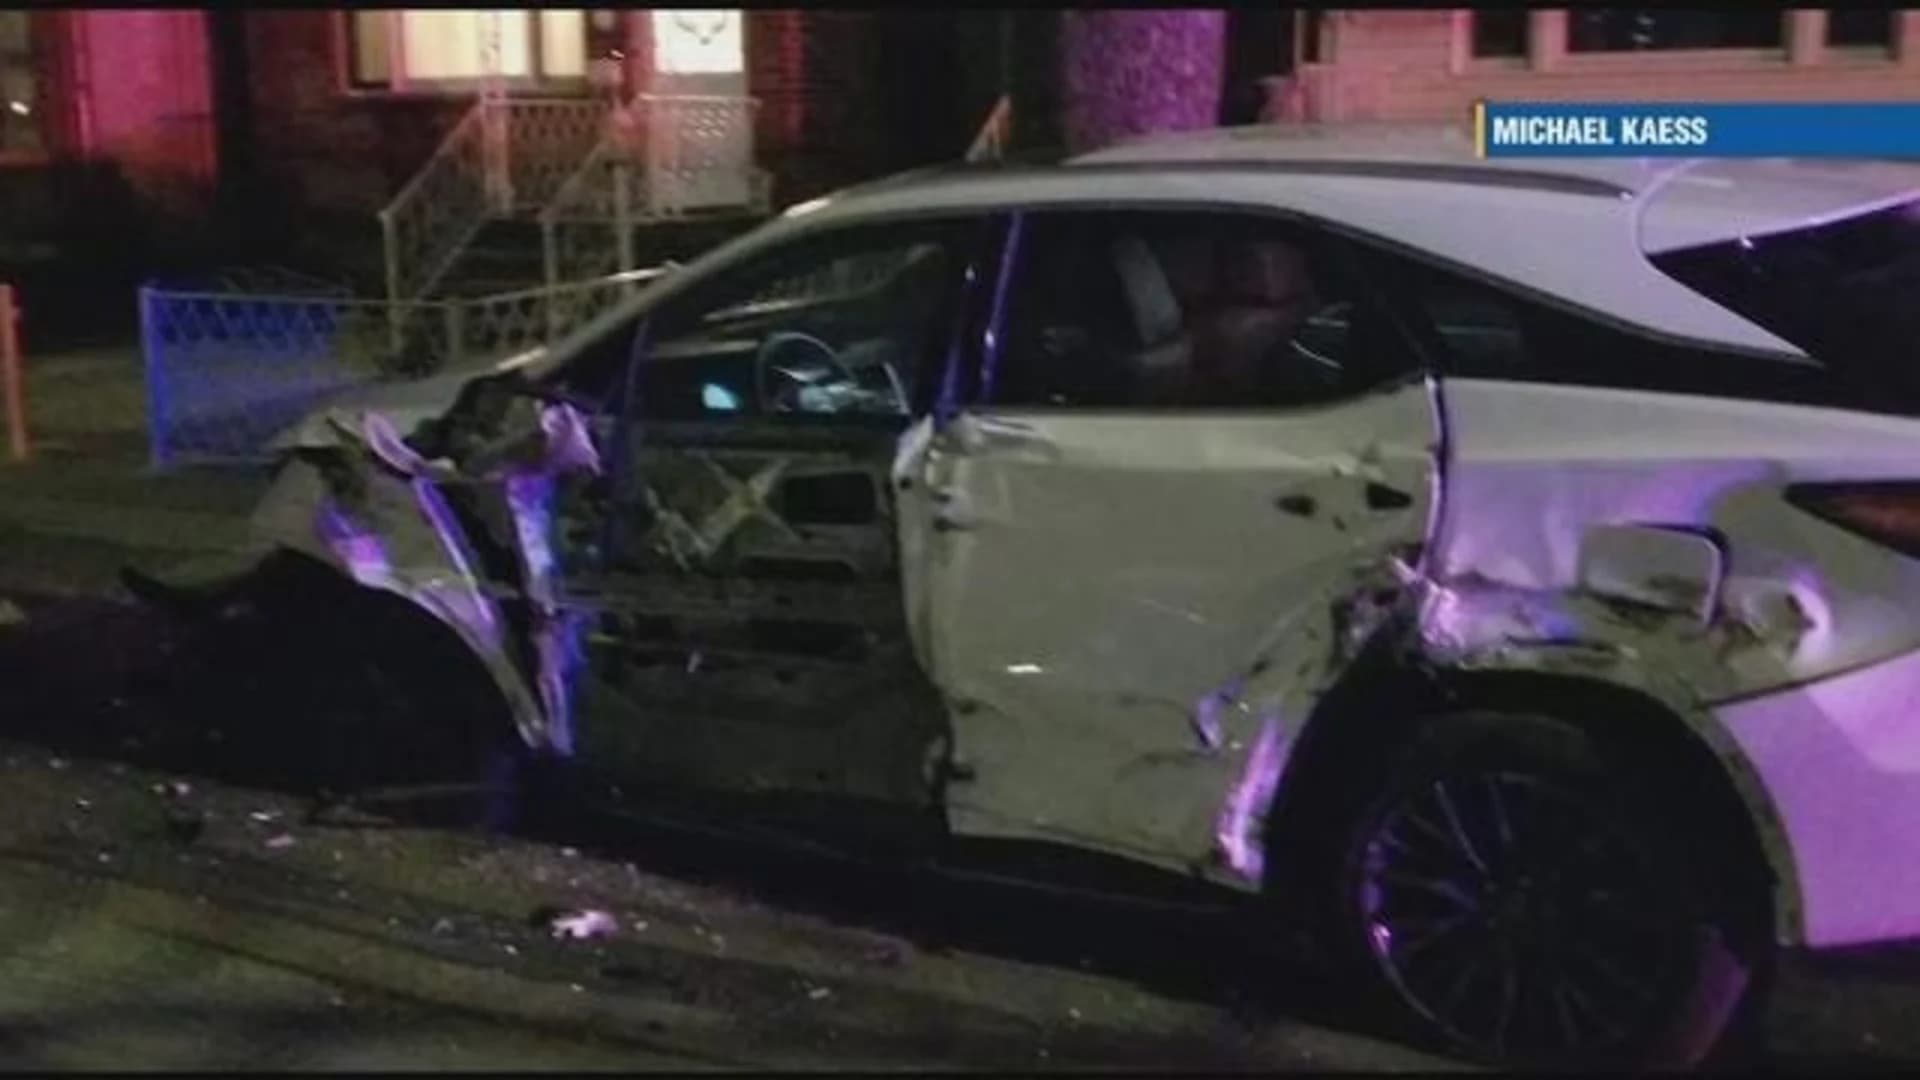 Police: Driver slammed into parked cars in Morris Park, then fled